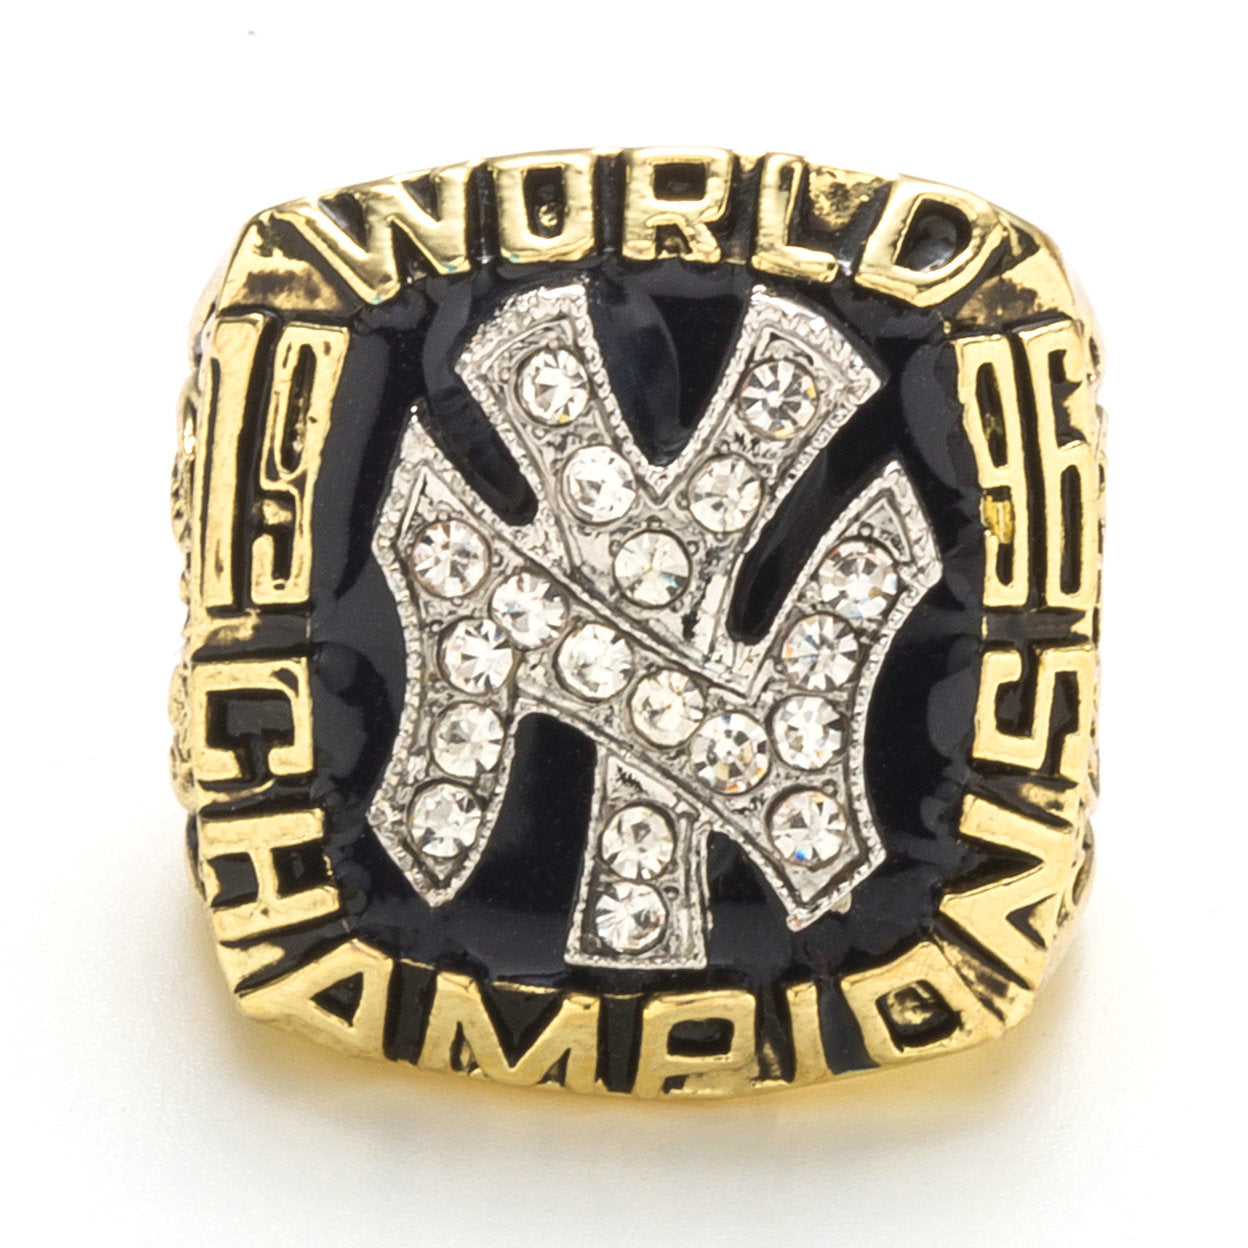 1996 NEW YORK YANKEES WORLD SERIES CHAMPIONSHIP TROPHY - Buy and Sell  Championship Rings